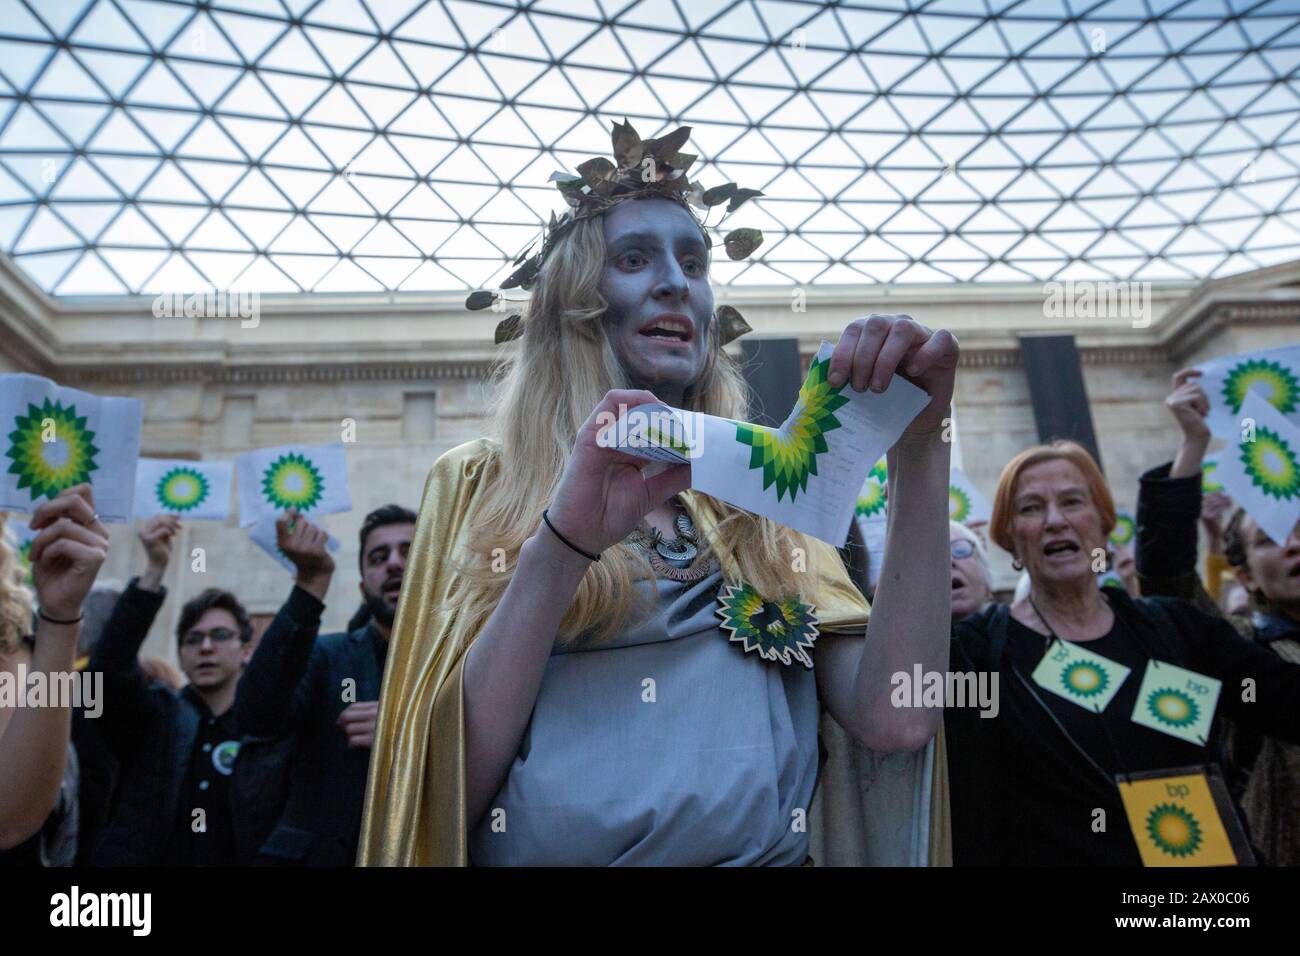 'BP Must Fall' demonstration at the British Museum against BP's continuing investment in fossil fuels, 18th of February 2020, Lonon, UK Stock Photo